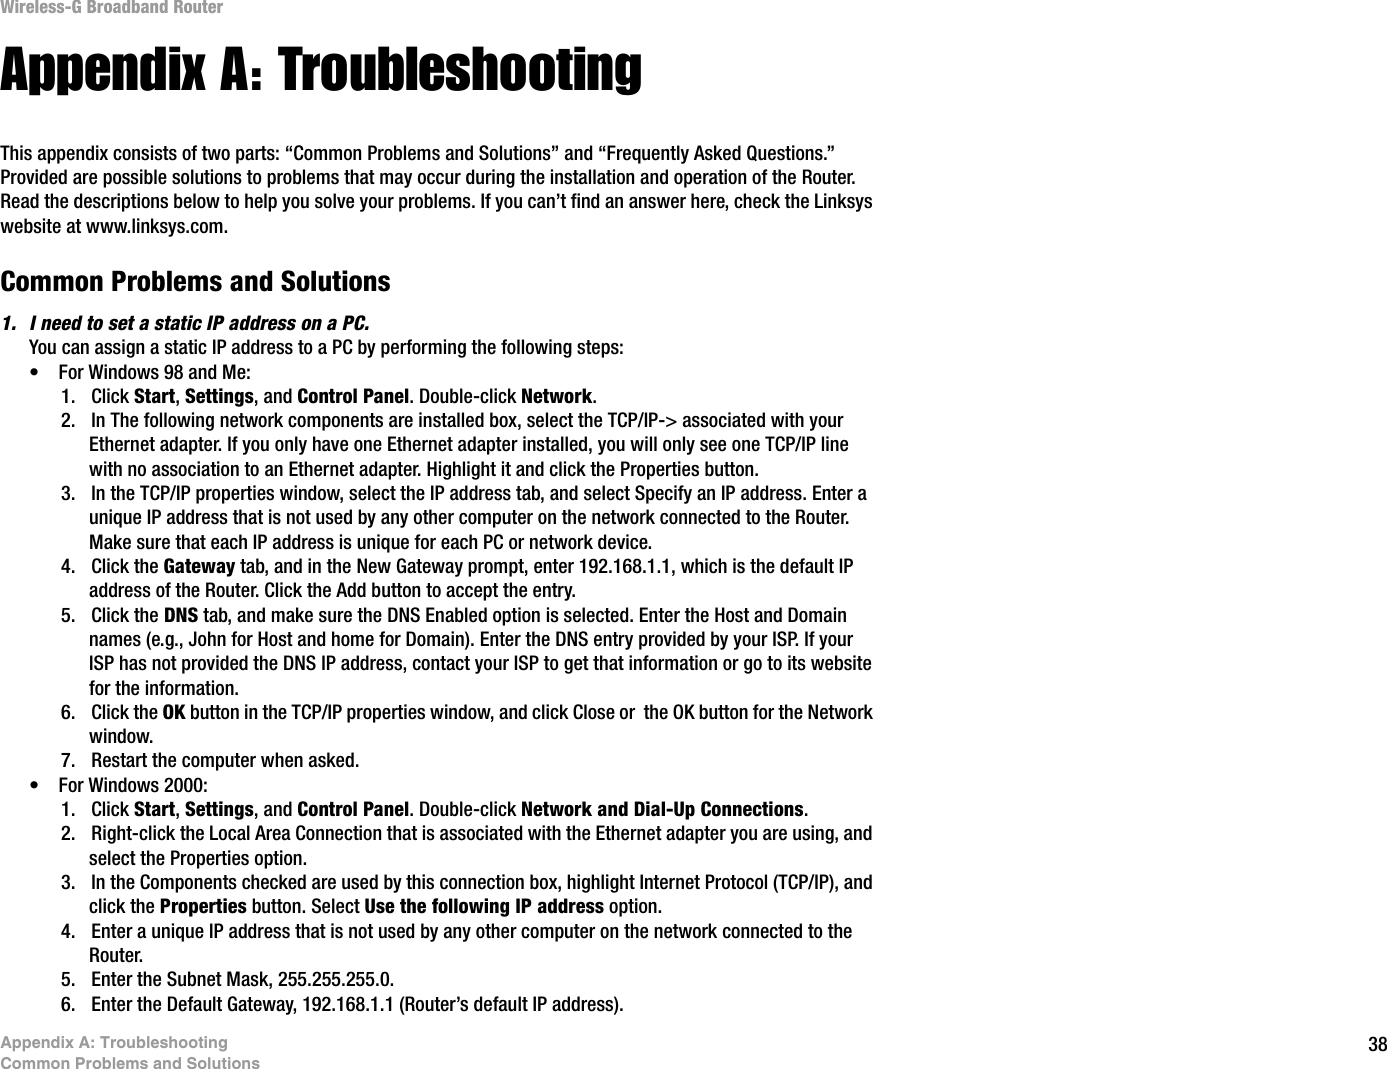 38Appendix A: TroubleshootingCommon Problems and SolutionsWireless-G Broadband RouterAppendix A: TroubleshootingThis appendix consists of two parts: “Common Problems and Solutions” and “Frequently Asked Questions.” Provided are possible solutions to problems that may occur during the installation and operation of the Router. Read the descriptions below to help you solve your problems. If you can’t find an answer here, check the Linksys website at www.linksys.com.Common Problems and Solutions1. I need to set a static IP address on a PC.You can assign a static IP address to a PC by performing the following steps:• For Windows 98 and Me:1. Click Start,Settings, and Control Panel. Double-click Network.2. In The following network components are installed box, select the TCP/IP-&gt; associated with your Ethernet adapter. If you only have one Ethernet adapter installed, you will only see one TCP/IP line with no association to an Ethernet adapter. Highlight it and click the Properties button.3. In the TCP/IP properties window, select the IP address tab, and select Specify an IP address. Enter a unique IP address that is not used by any other computer on the network connected to the Router. Make sure that each IP address is unique for each PC or network device.4. Click the Gateway tab, and in the New Gateway prompt, enter 192.168.1.1, which is the default IP address of the Router. Click the Add button to accept the entry.5. Click the DNS tab, and make sure the DNS Enabled option is selected. Enter the Host and Domain names (e.g., John for Host and home for Domain). Enter the DNS entry provided by your ISP. If your ISP has not provided the DNS IP address, contact your ISP to get that information or go to its website for the information.6. Click the OK button in the TCP/IP properties window, and click Close or  the OK button for the Network window.7. Restart the computer when asked.• For Windows 2000:1. Click Start,Settings, and Control Panel. Double-click Network and Dial-Up Connections.2. Right-click the Local Area Connection that is associated with the Ethernet adapter you are using, and select the Properties option.3. In the Components checked are used by this connection box, highlight Internet Protocol (TCP/IP), and click the Properties button. Select Use the following IP address option.4. Enter a unique IP address that is not used by any other computer on the network connected to the Router. 5. Enter the Subnet Mask, 255.255.255.0.6. Enter the Default Gateway, 192.168.1.1 (Router’s default IP address).